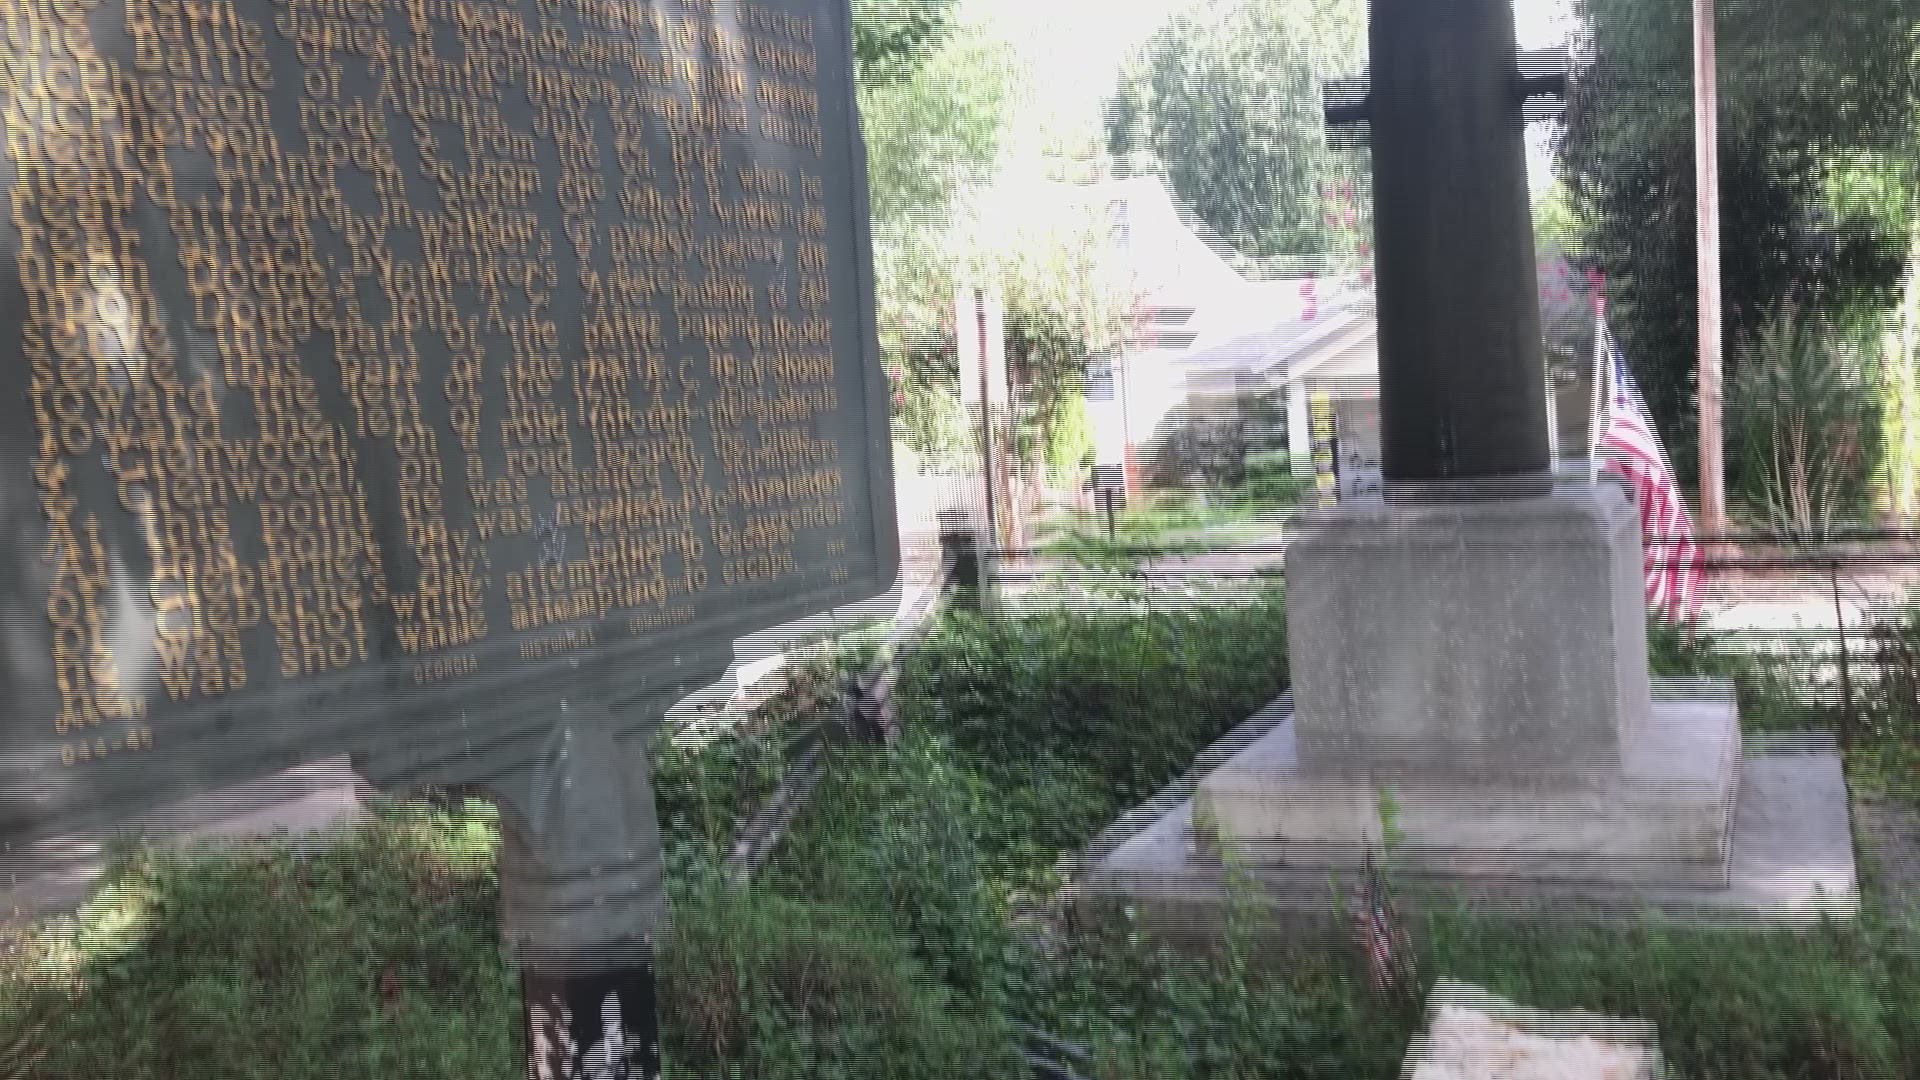 Severe damage to pillars and railings discovered by residents at Civil War memorial site